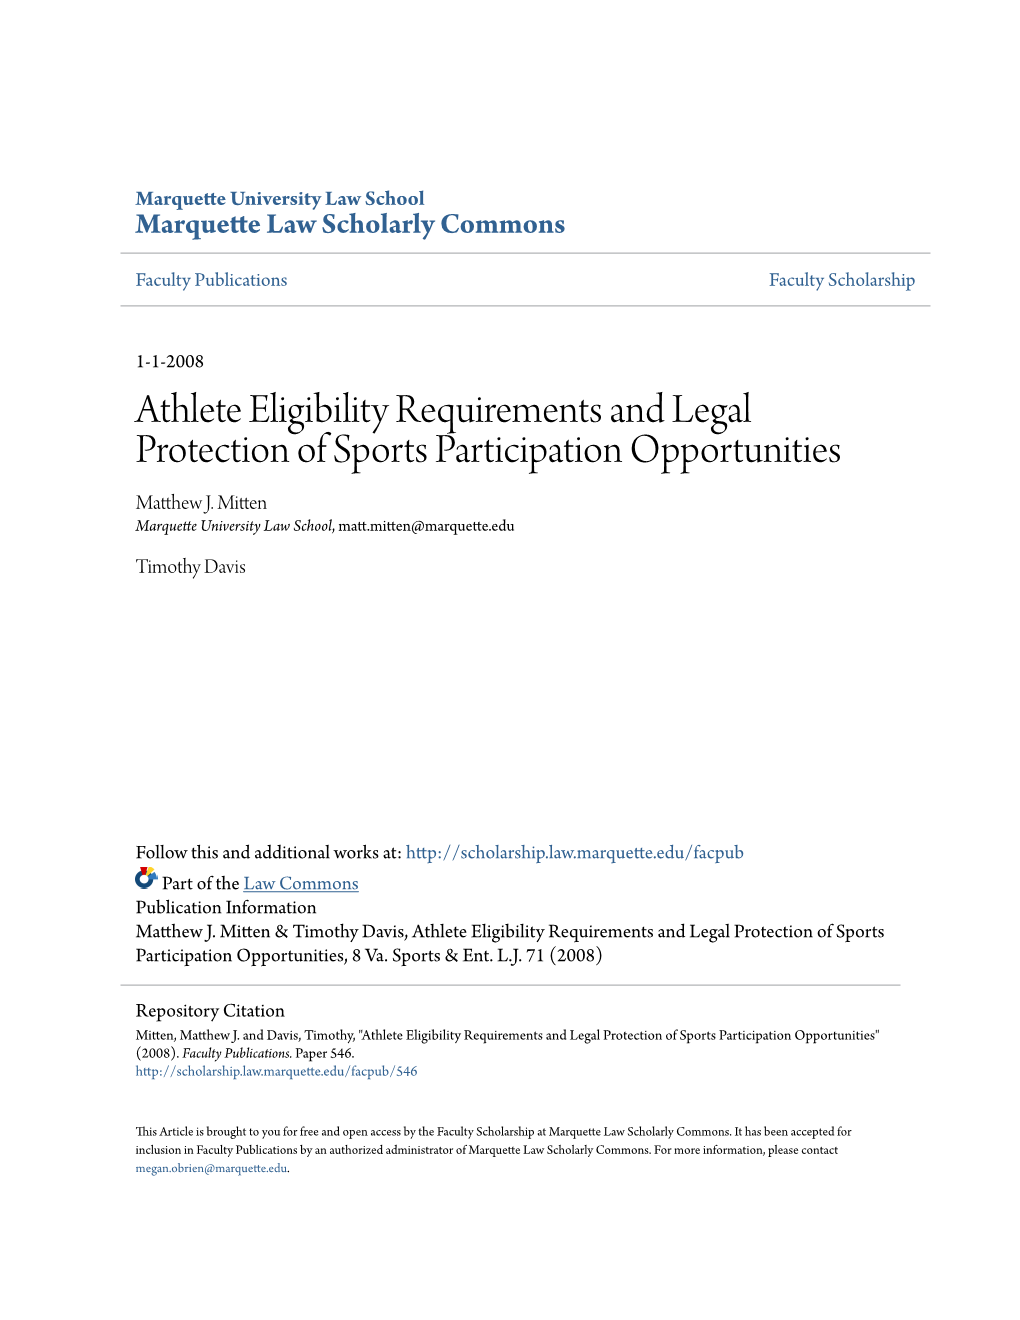 Athlete Eligibility Requirements and Legal Protection of Sports